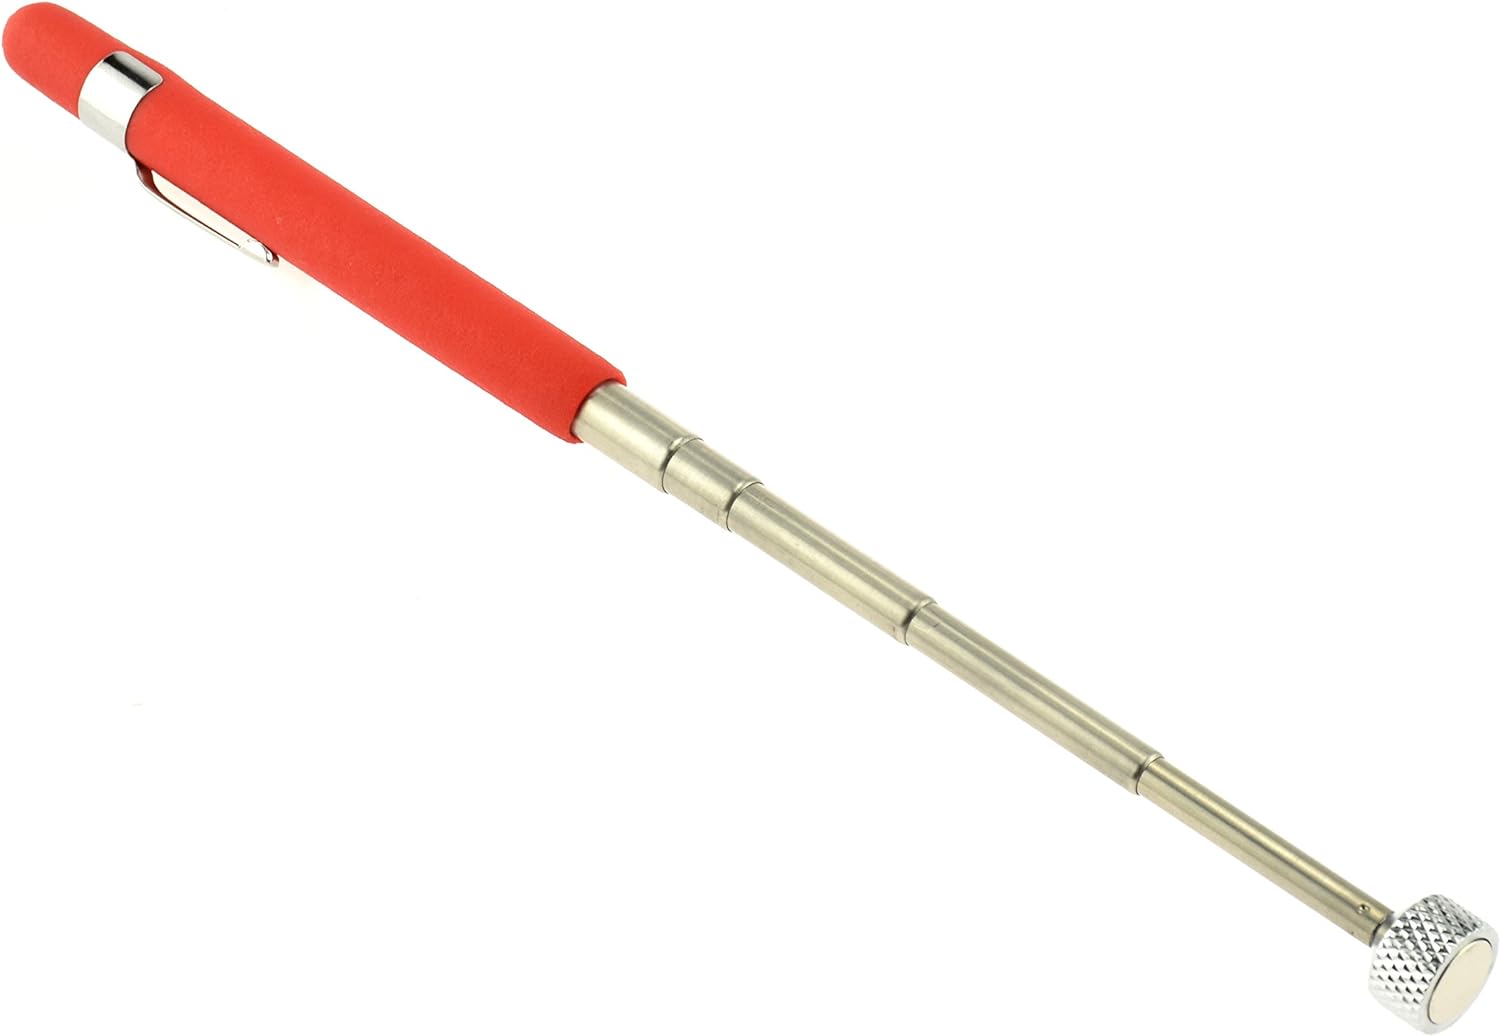  9 lb Telescoping Magnet Pick Up Tool With Clip Red Handle 1